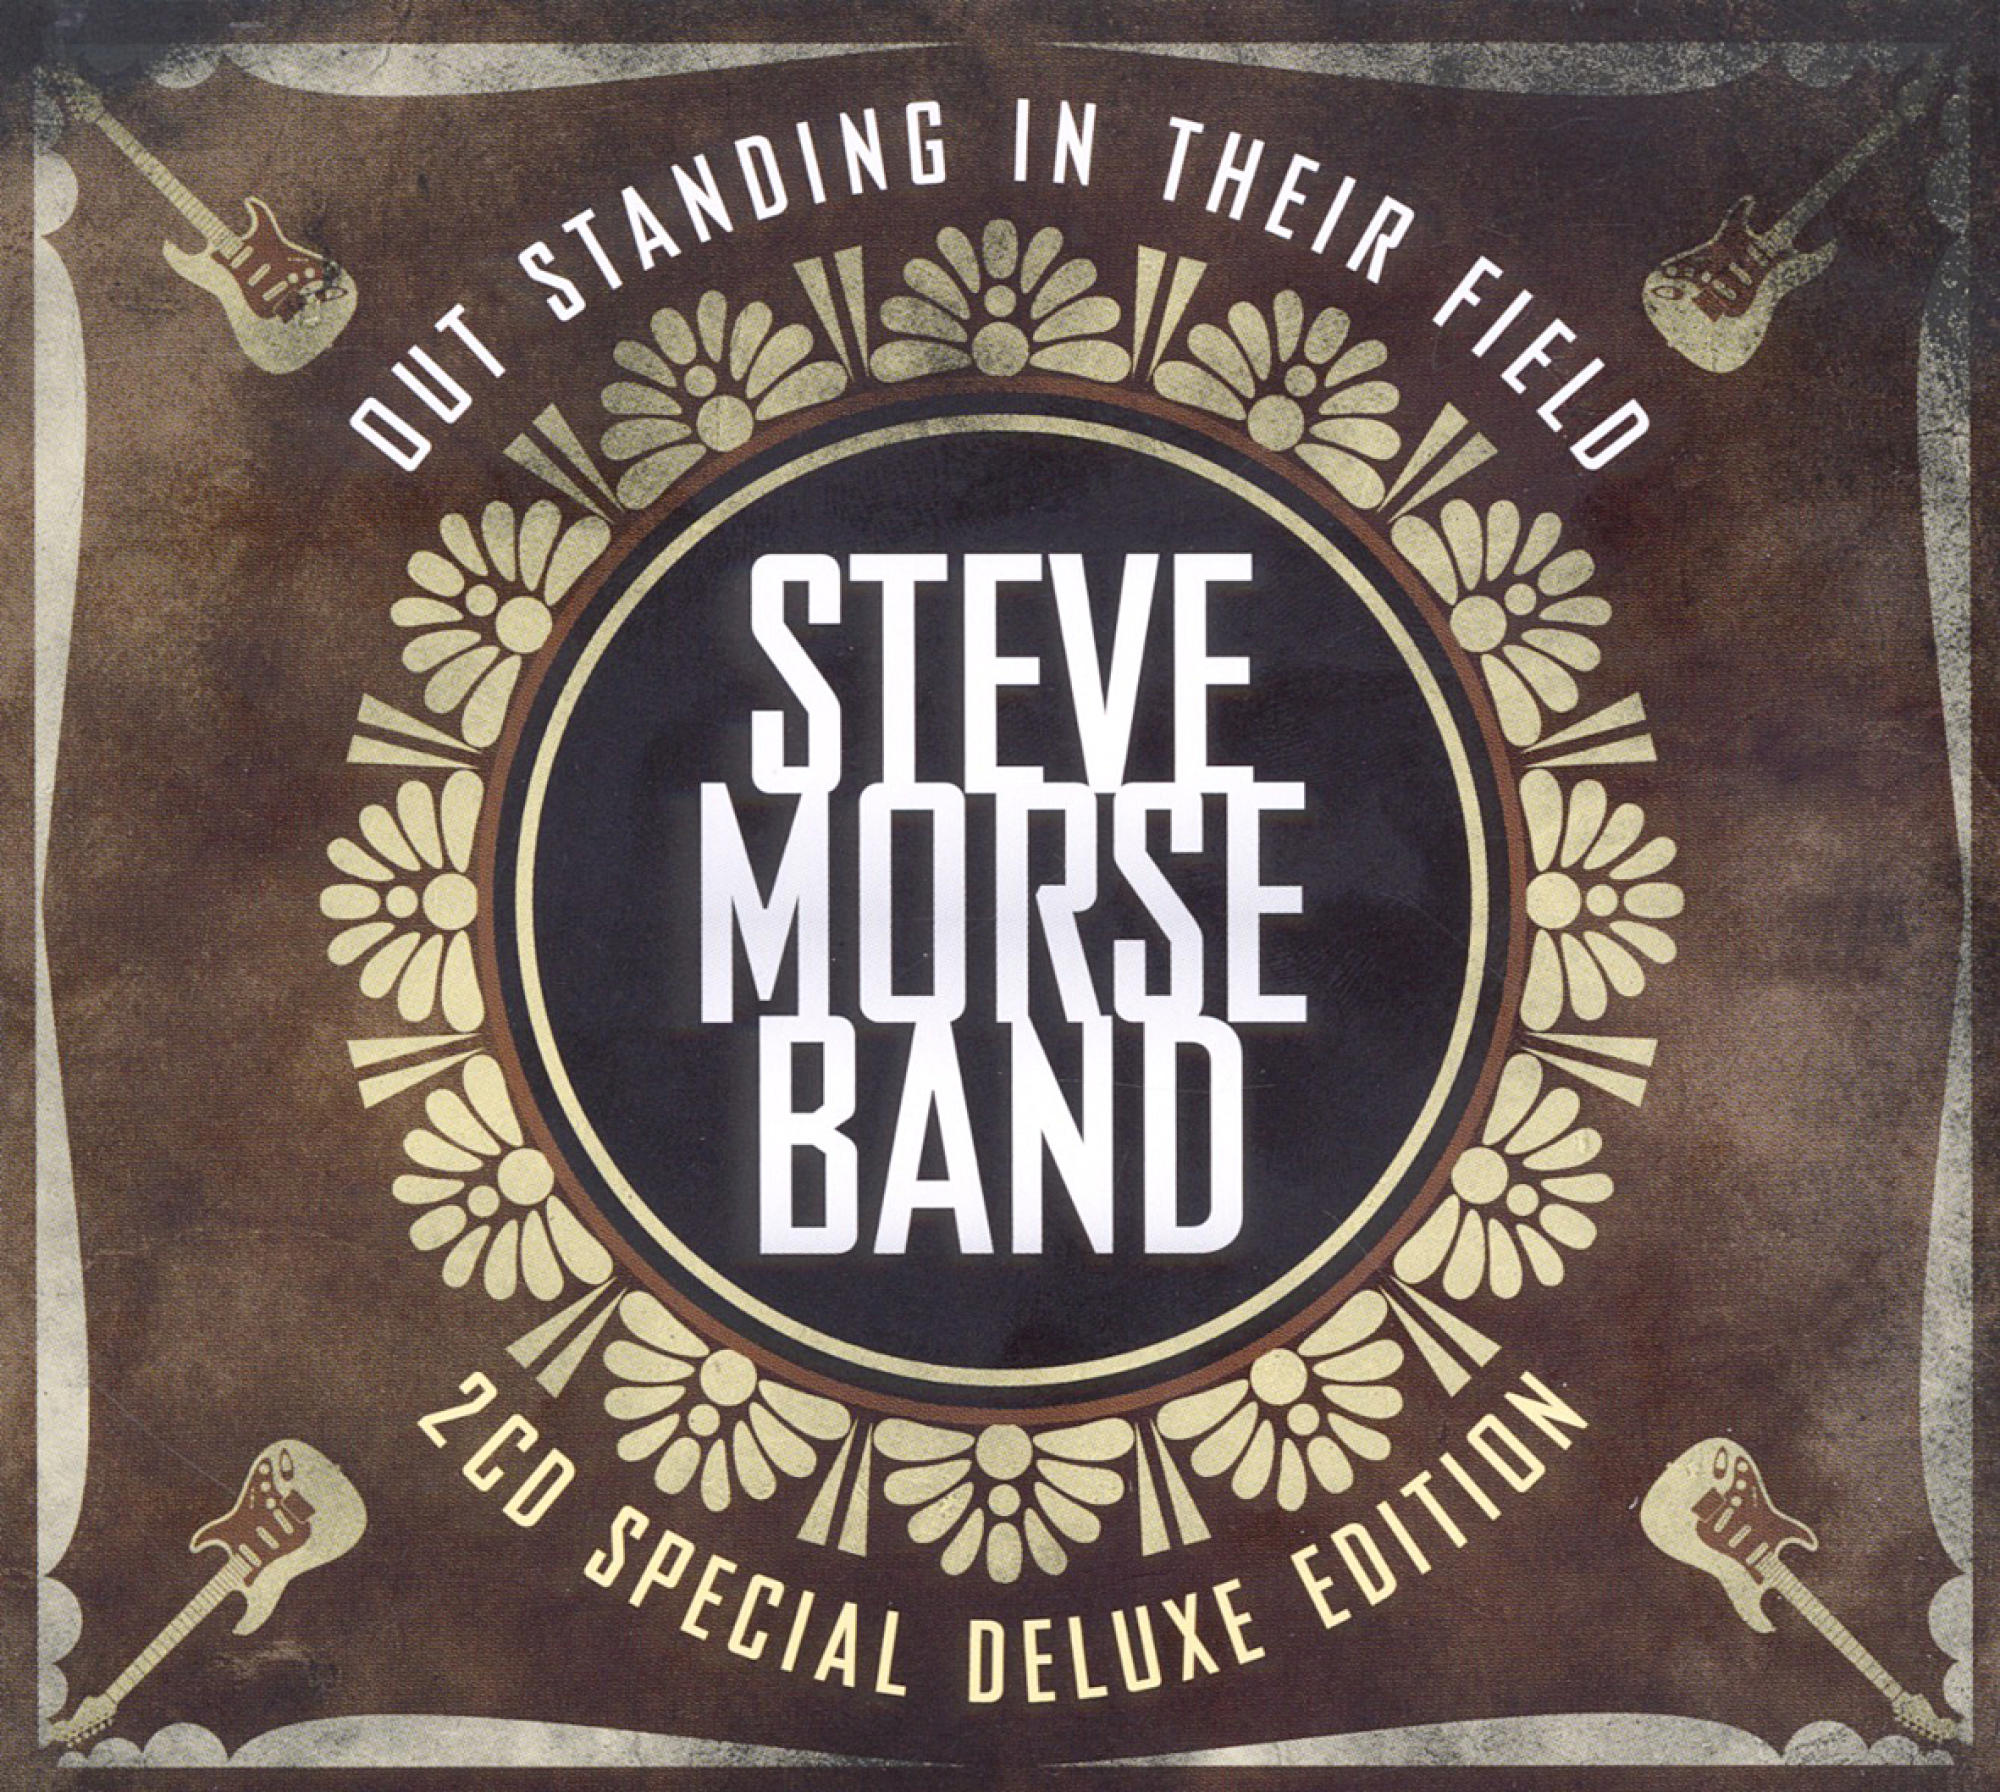 Live Ed - (CD) Germany-Spec.Deluxe Steve & Standing - Morse From Out